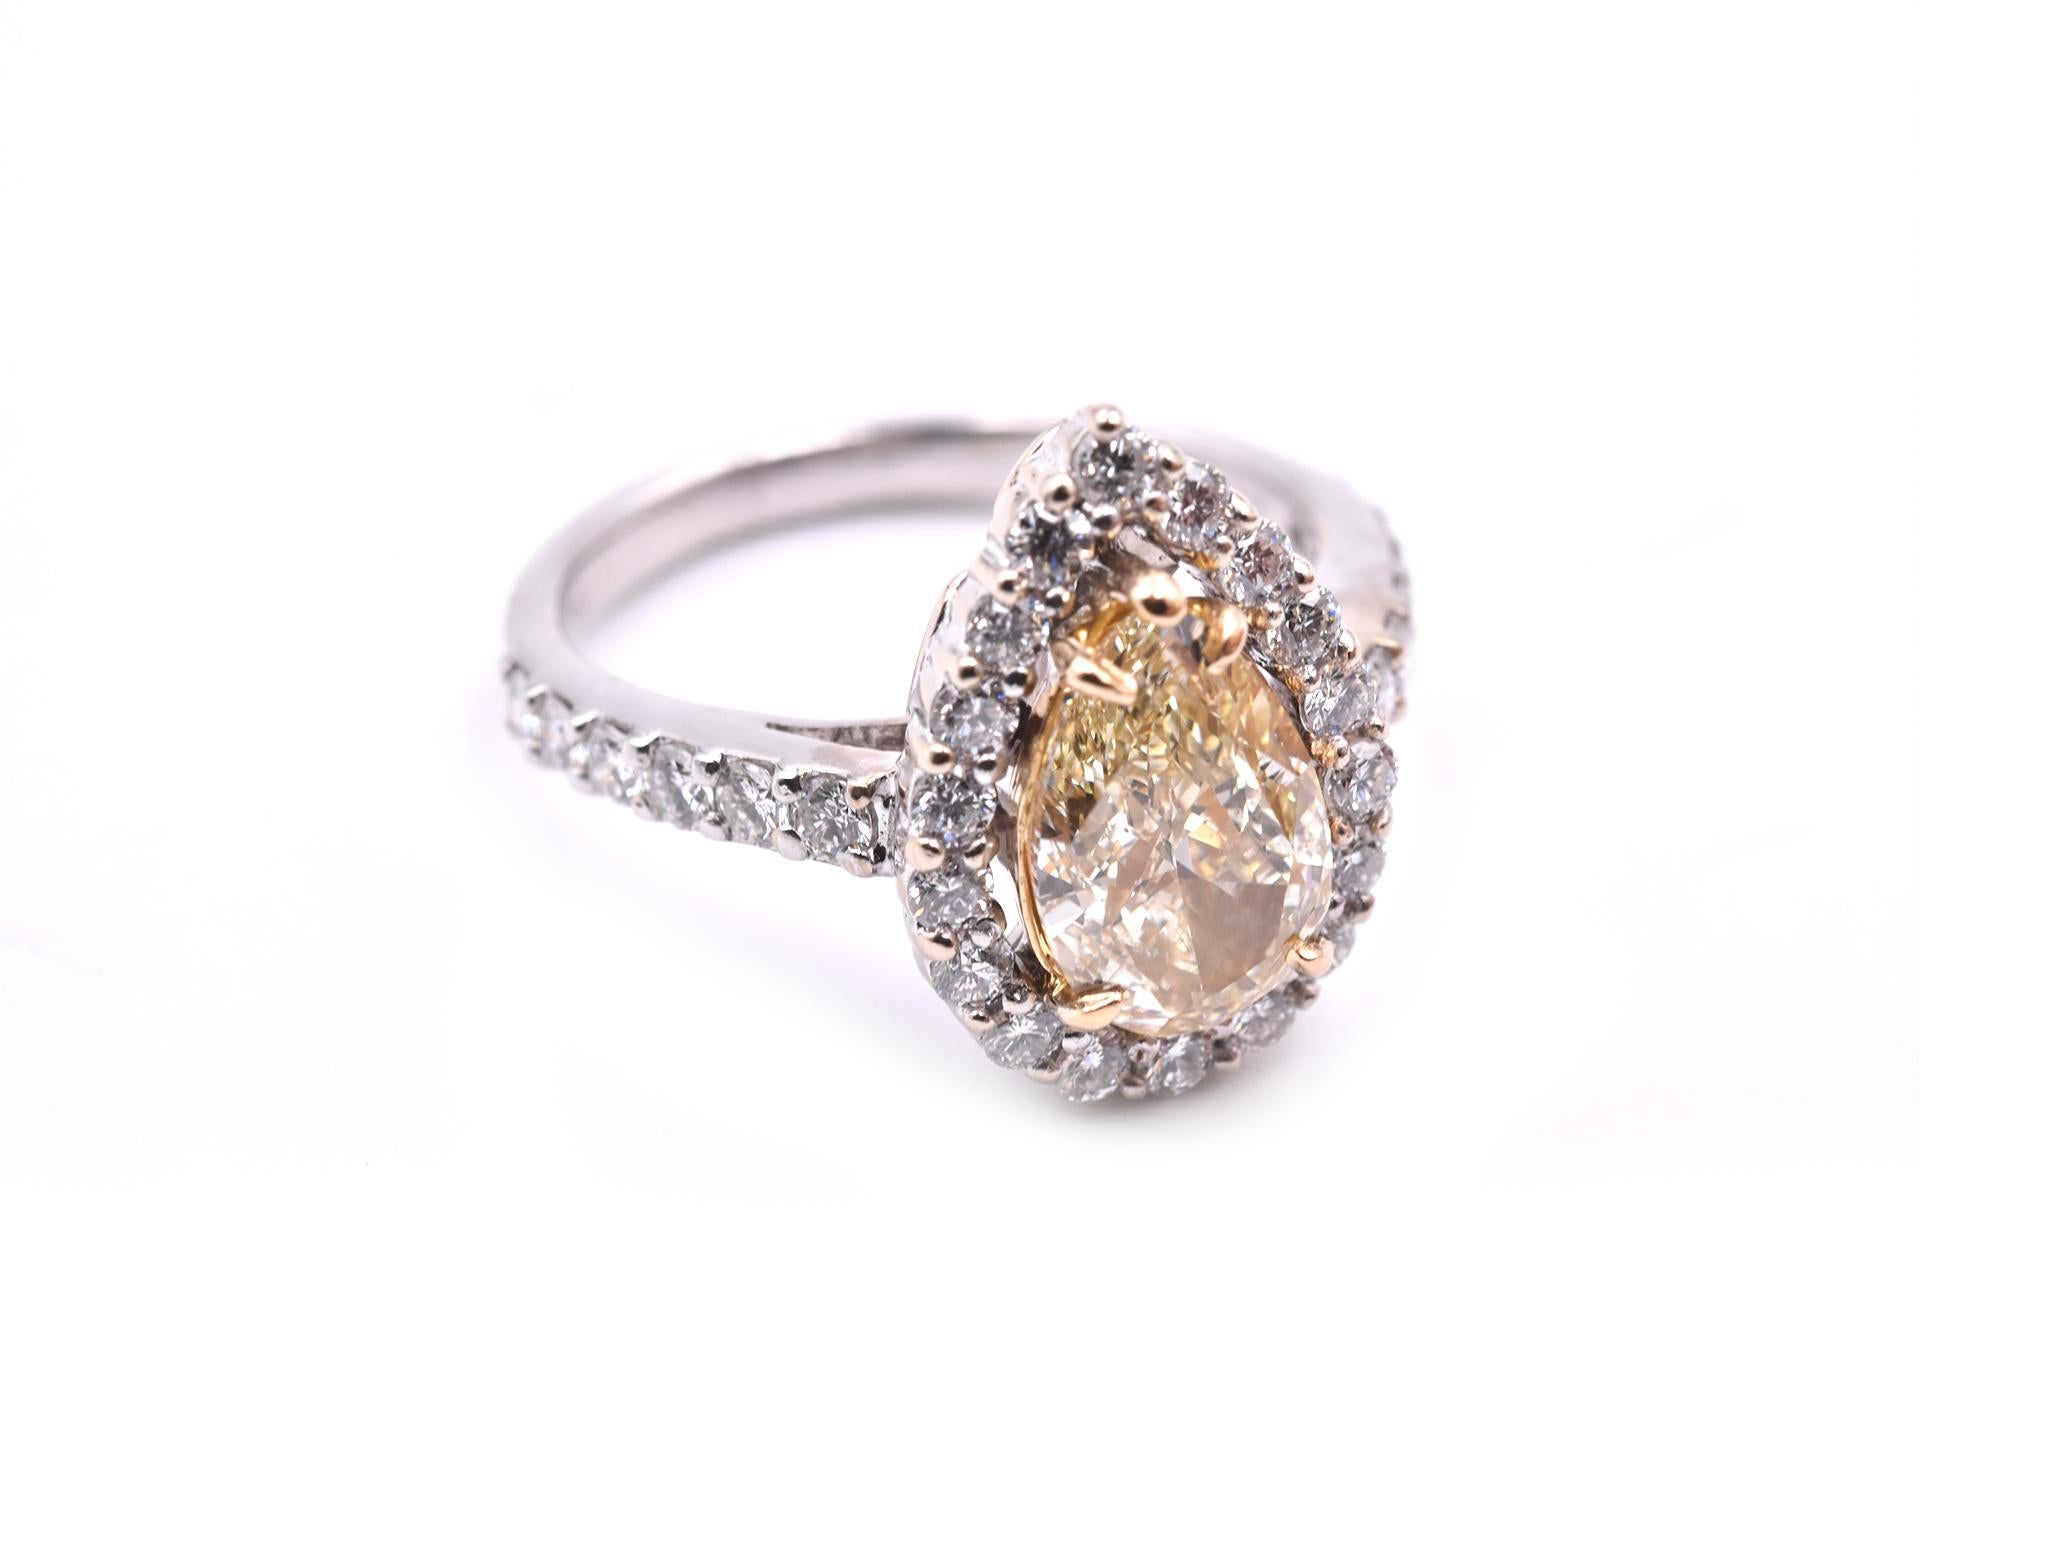 Designer: custom design
Material: 18k white gold
Center Diamond: 1 pear cut fancy light yellow= 1.84ct
Color: I
Clarity: SI1
Diamonds: 42 round brilliant cut= .84cttw
Color: G
Clarity: VS
Ring size: 6 ¾ (please allow two additional shipping days for